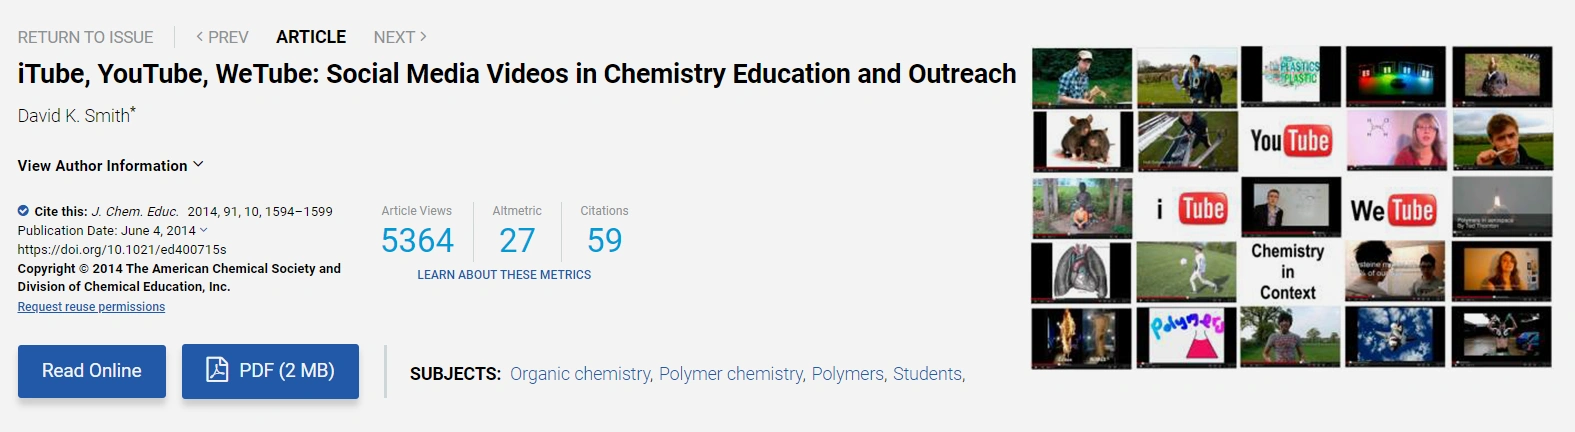 The application of social media in chemistry education